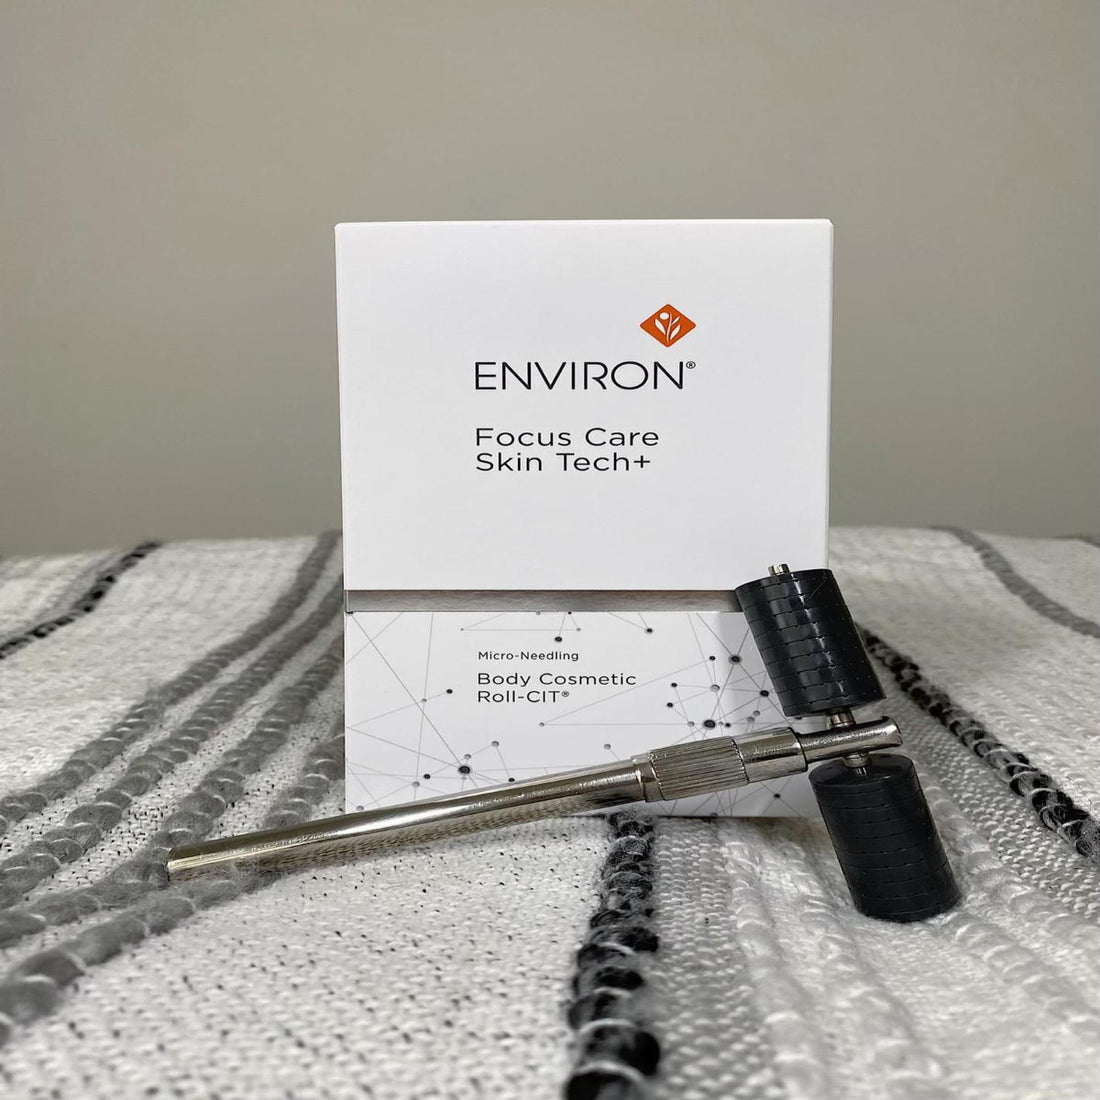 The Environ Focus Care Skin Tech+ Body Cosmetic Roll-CIT